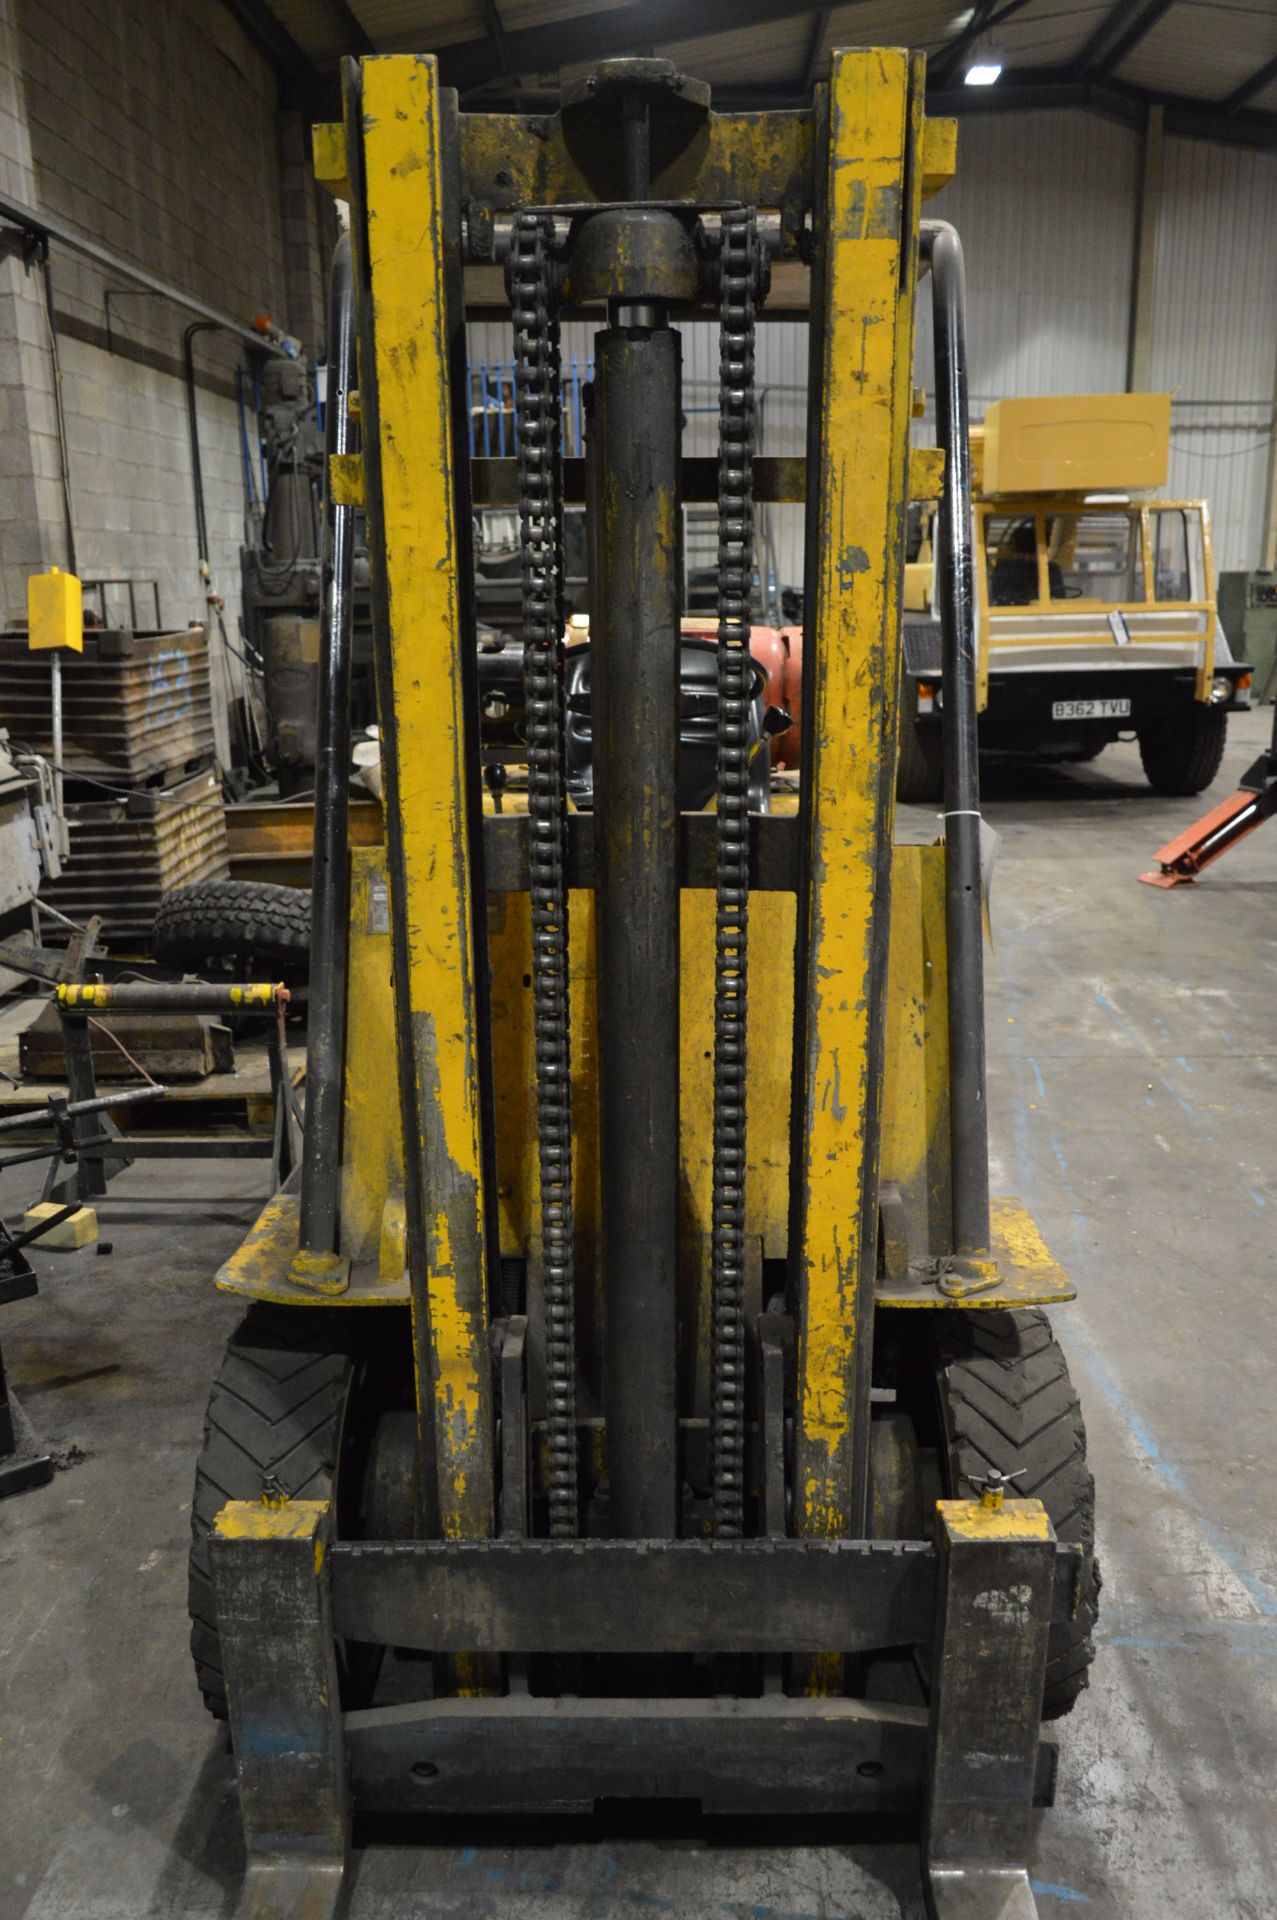 Caterpillar V50B TYPE G 2500kg cap GAS ENGINE FORK LIFT TRUCK, serial no. 54W328,., 3710mm max - Image 5 of 9